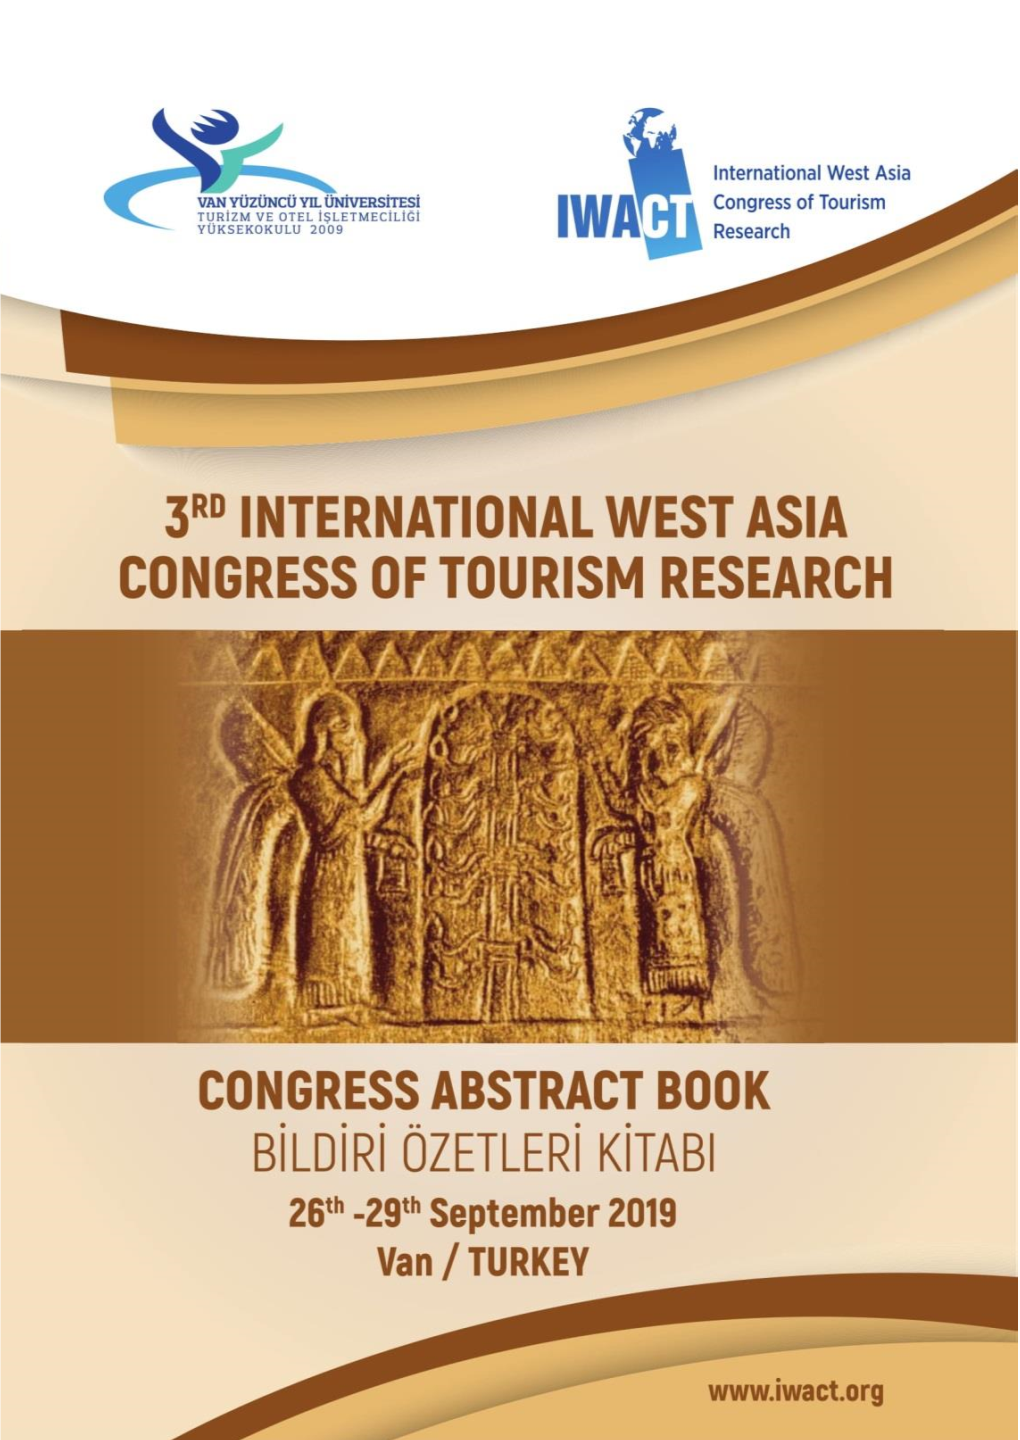 International West Asia Congress of Tourism Research